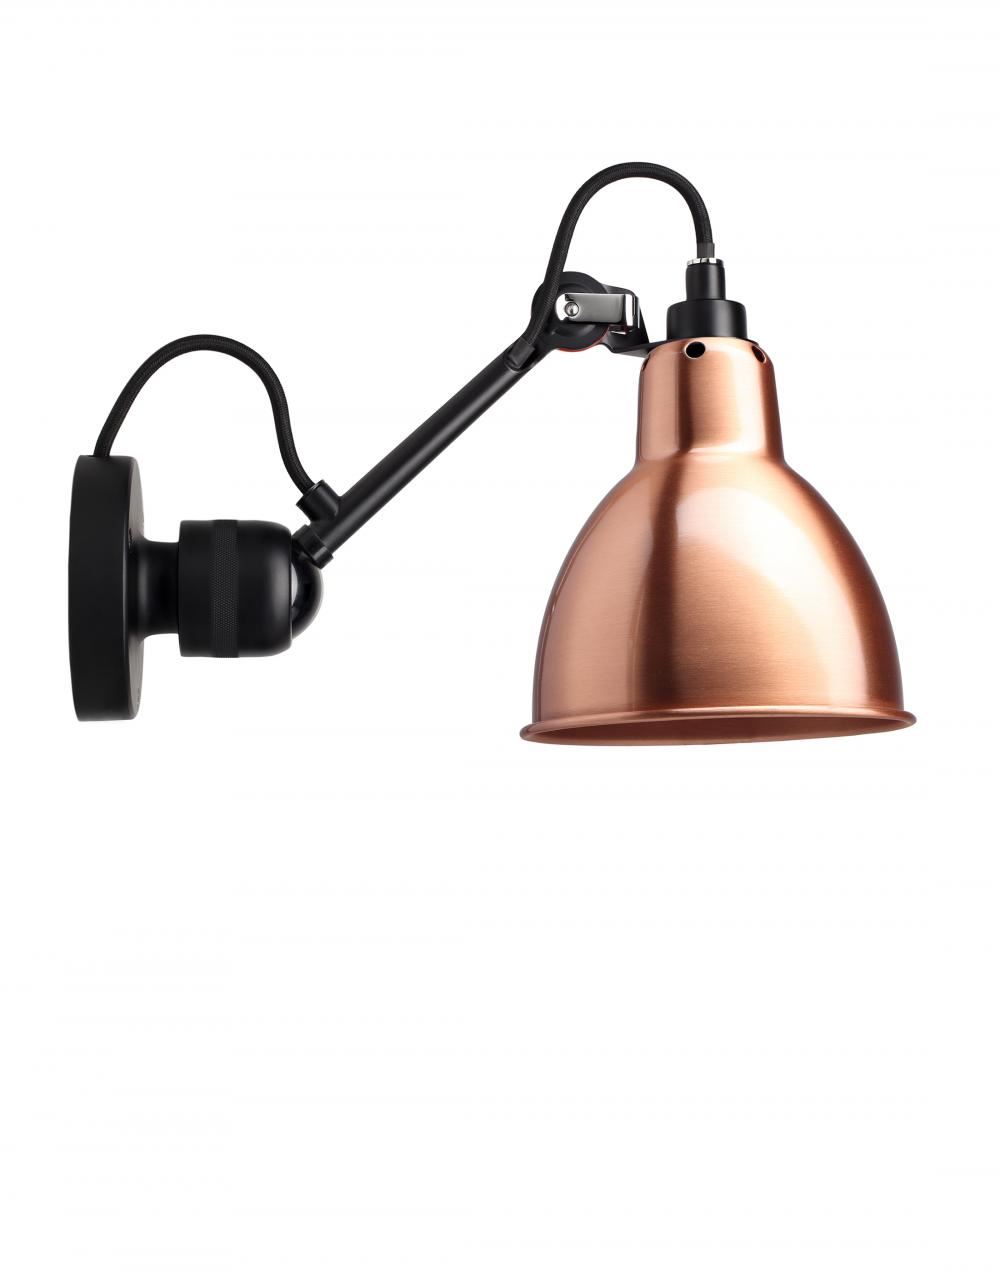 Lampe Gras 304 Small Wall Light Black Arm Copper Shade Round Hardwired